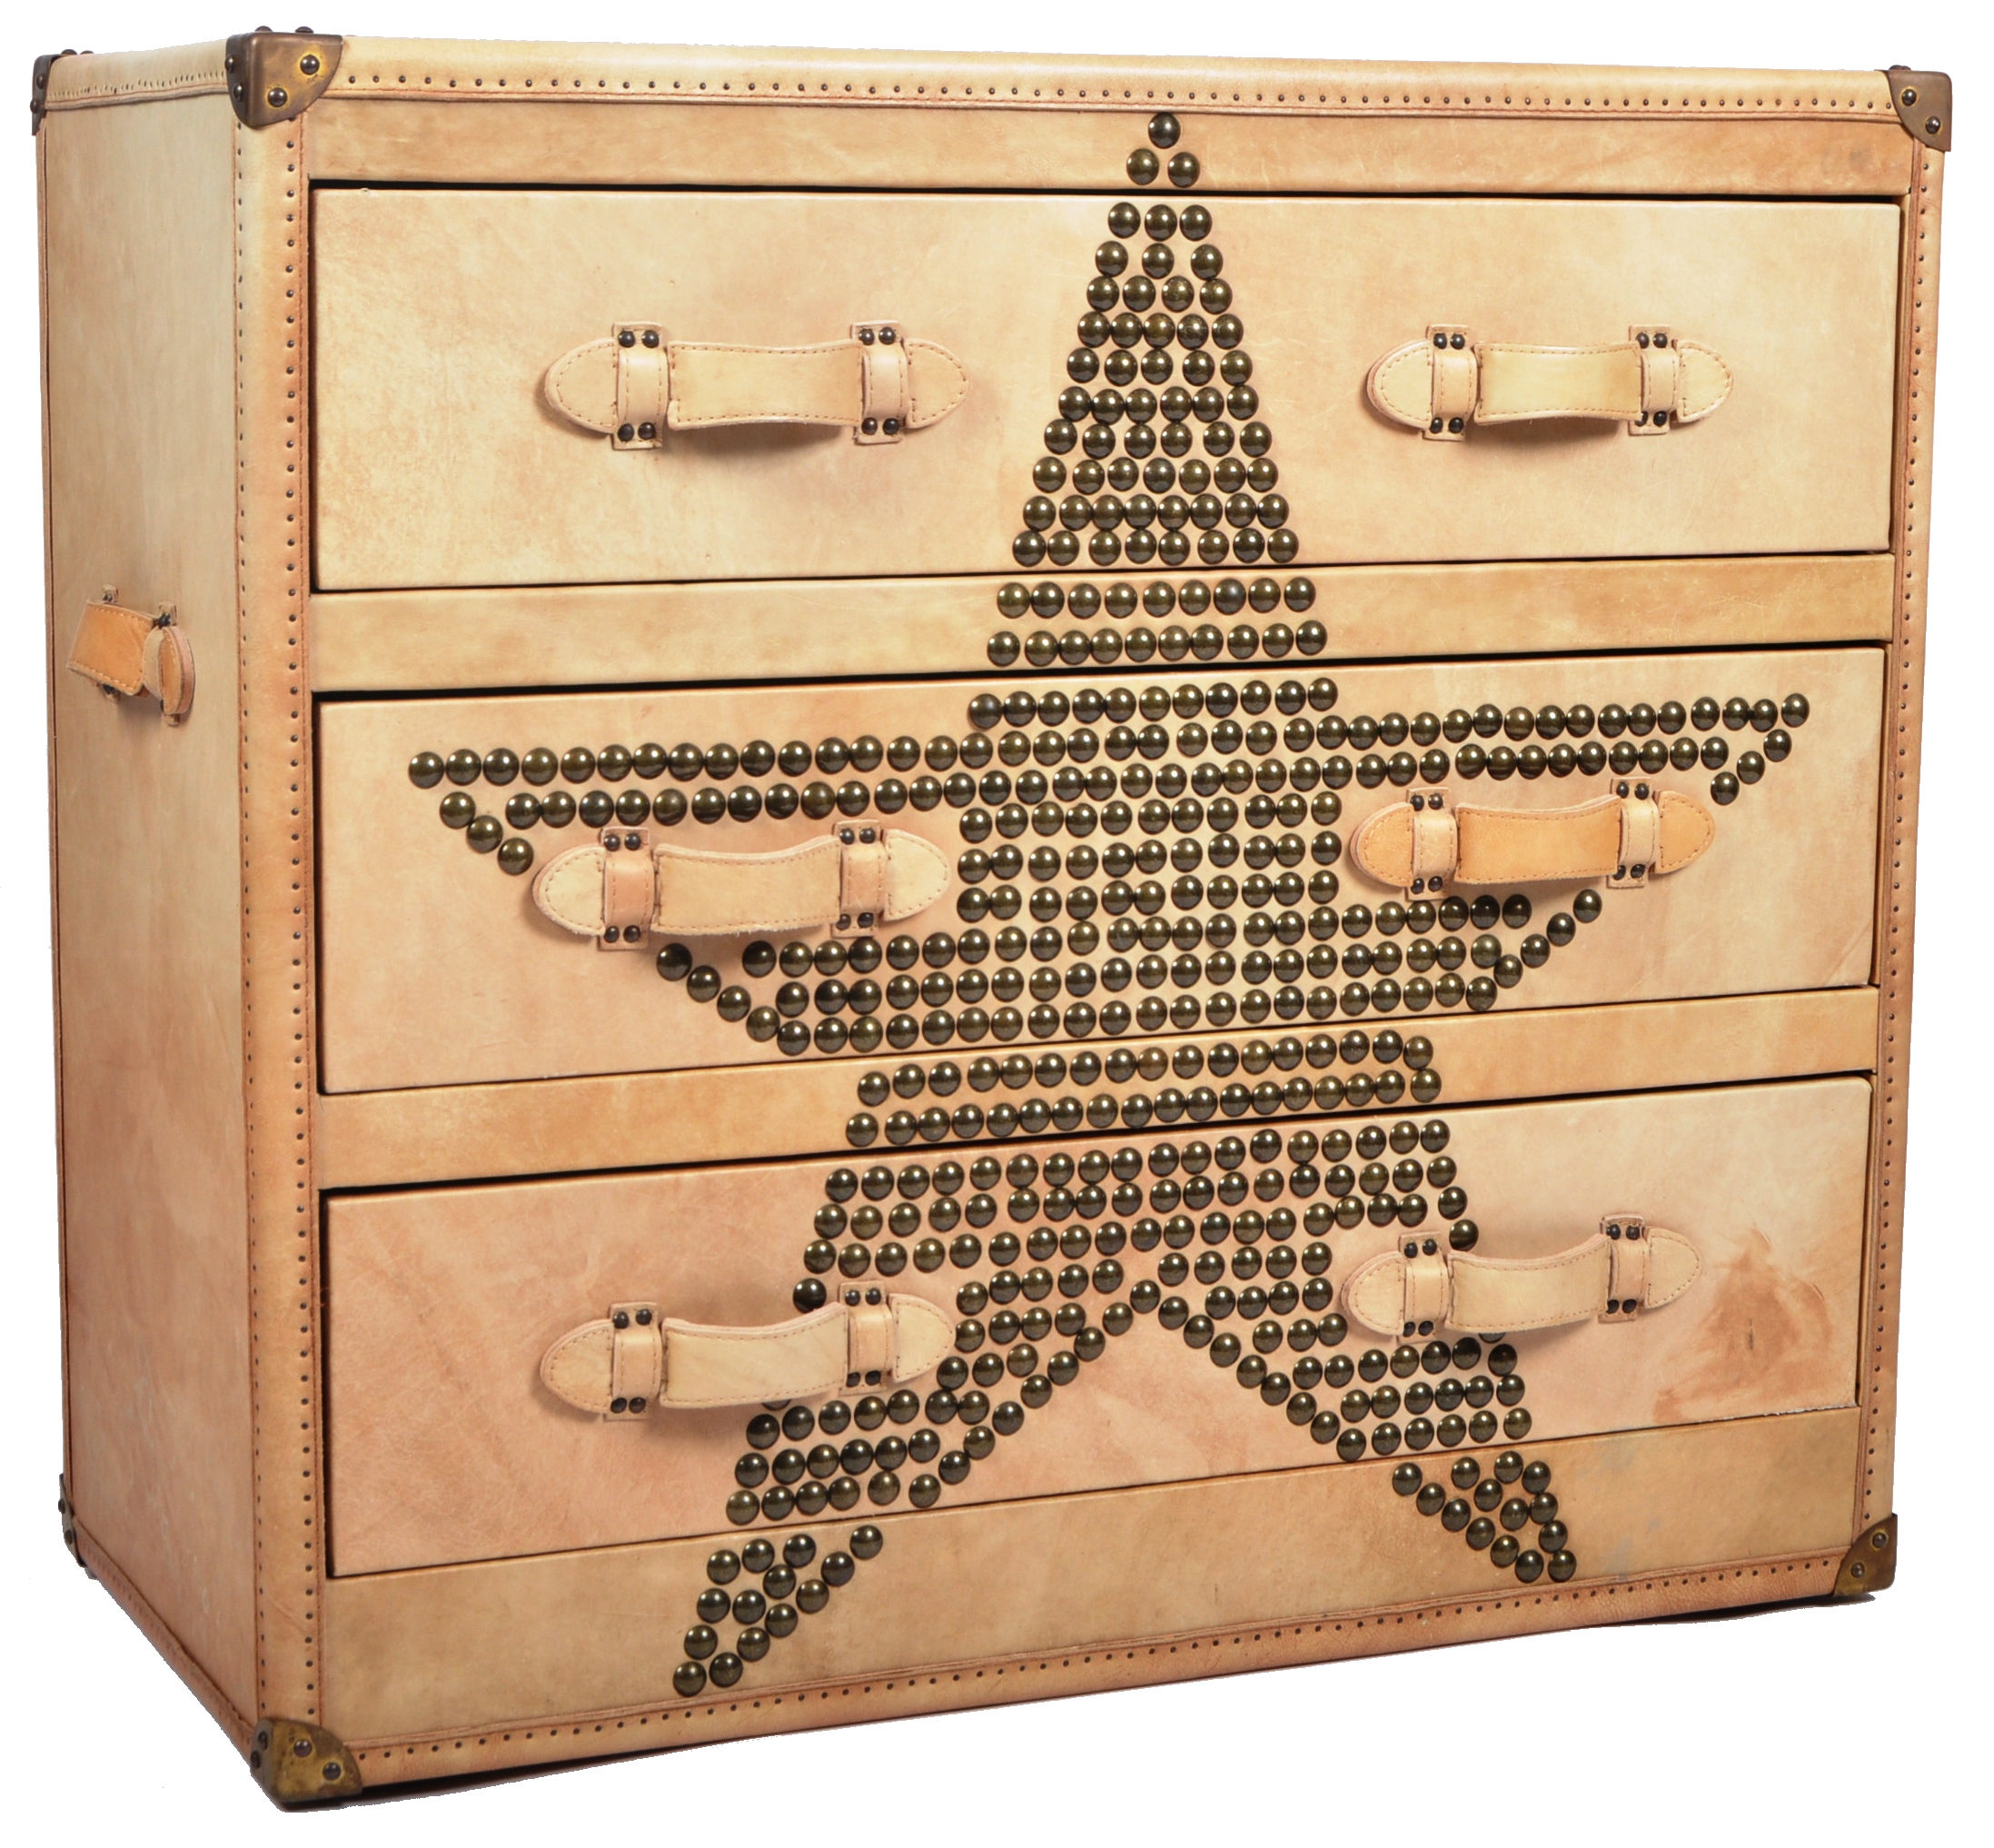 ANDREW MARTIN - PARCHMENT LEATHER CHEST OF DRAWERS